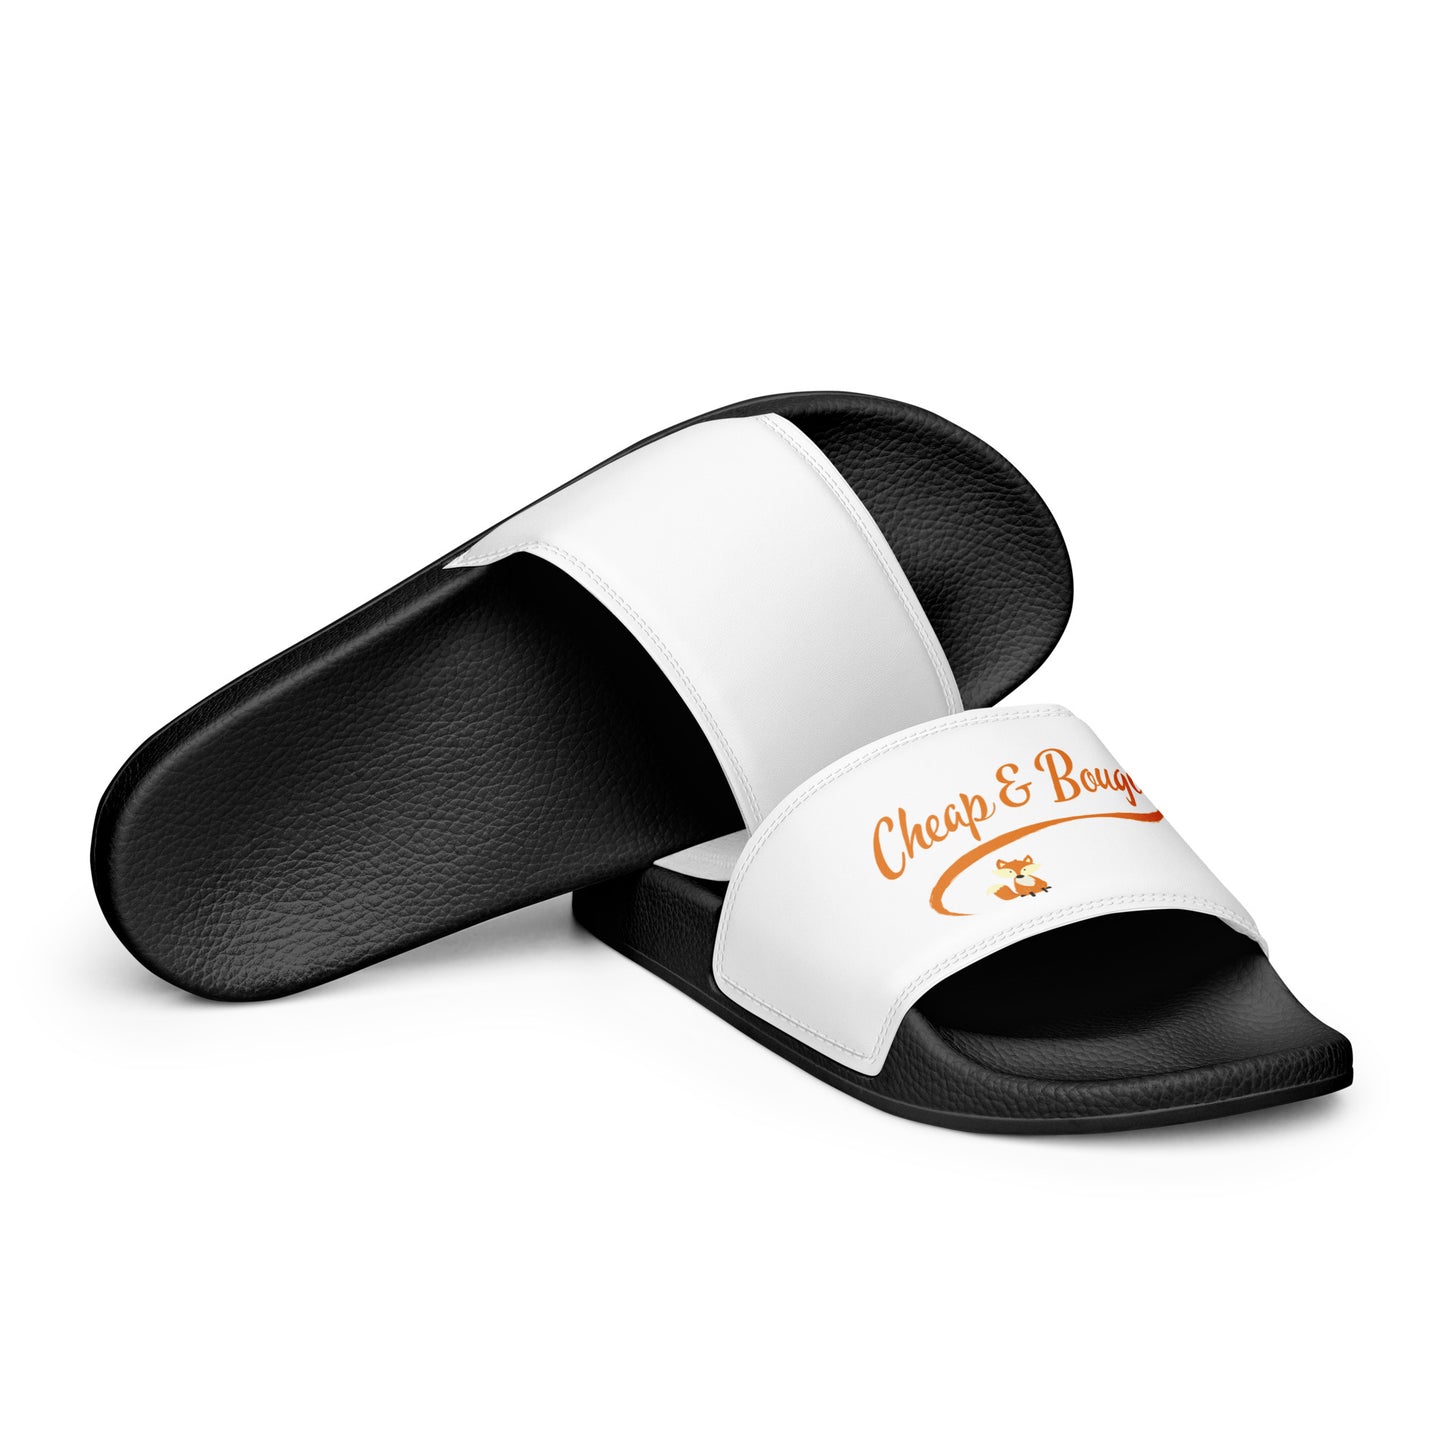 Cheap and Bougie Men’s slides